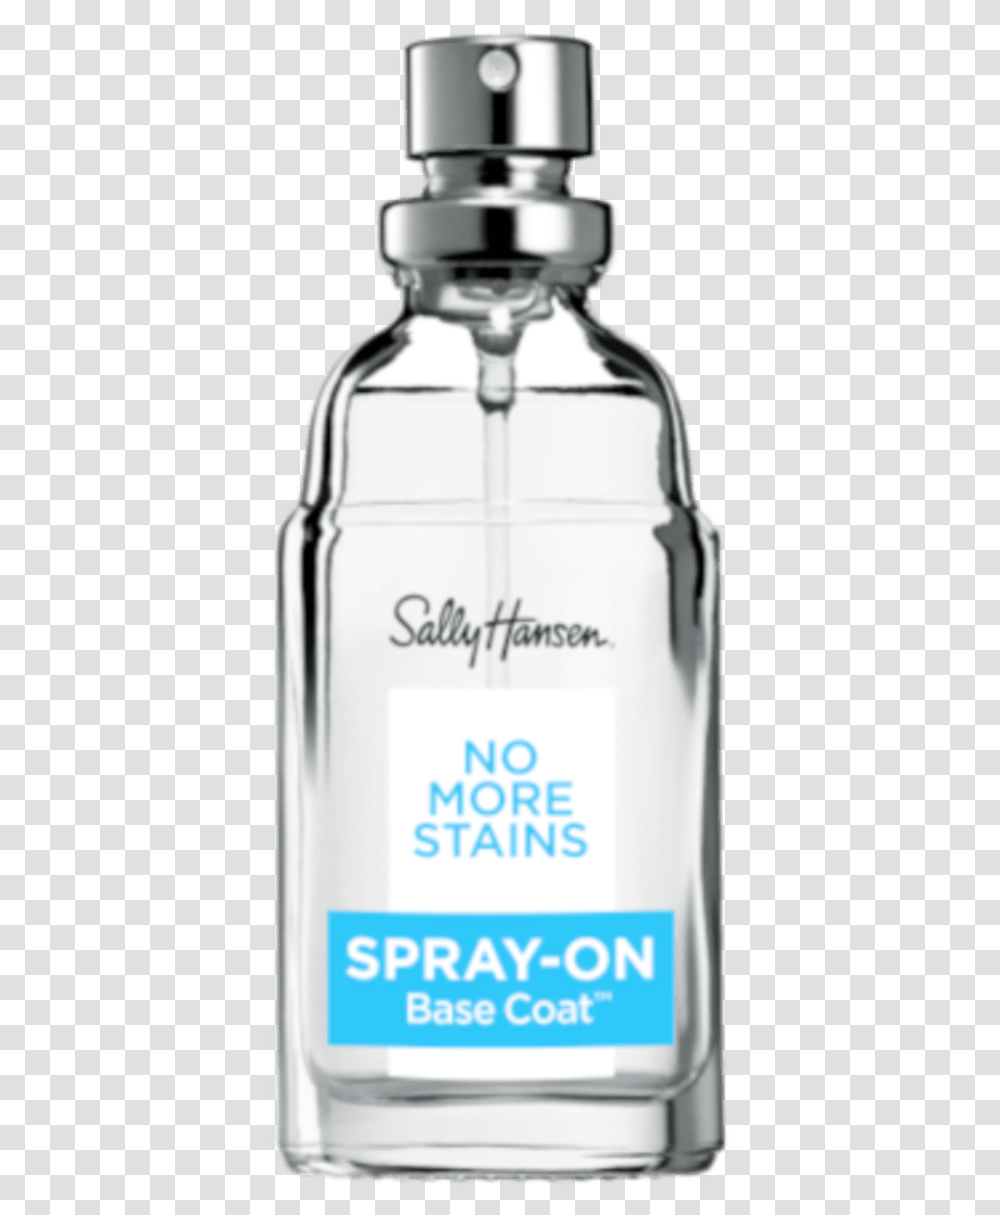 Sally Hansen No More Stains Spray On Base Coat, Bottle, Cosmetics, Liquor, Alcohol Transparent Png